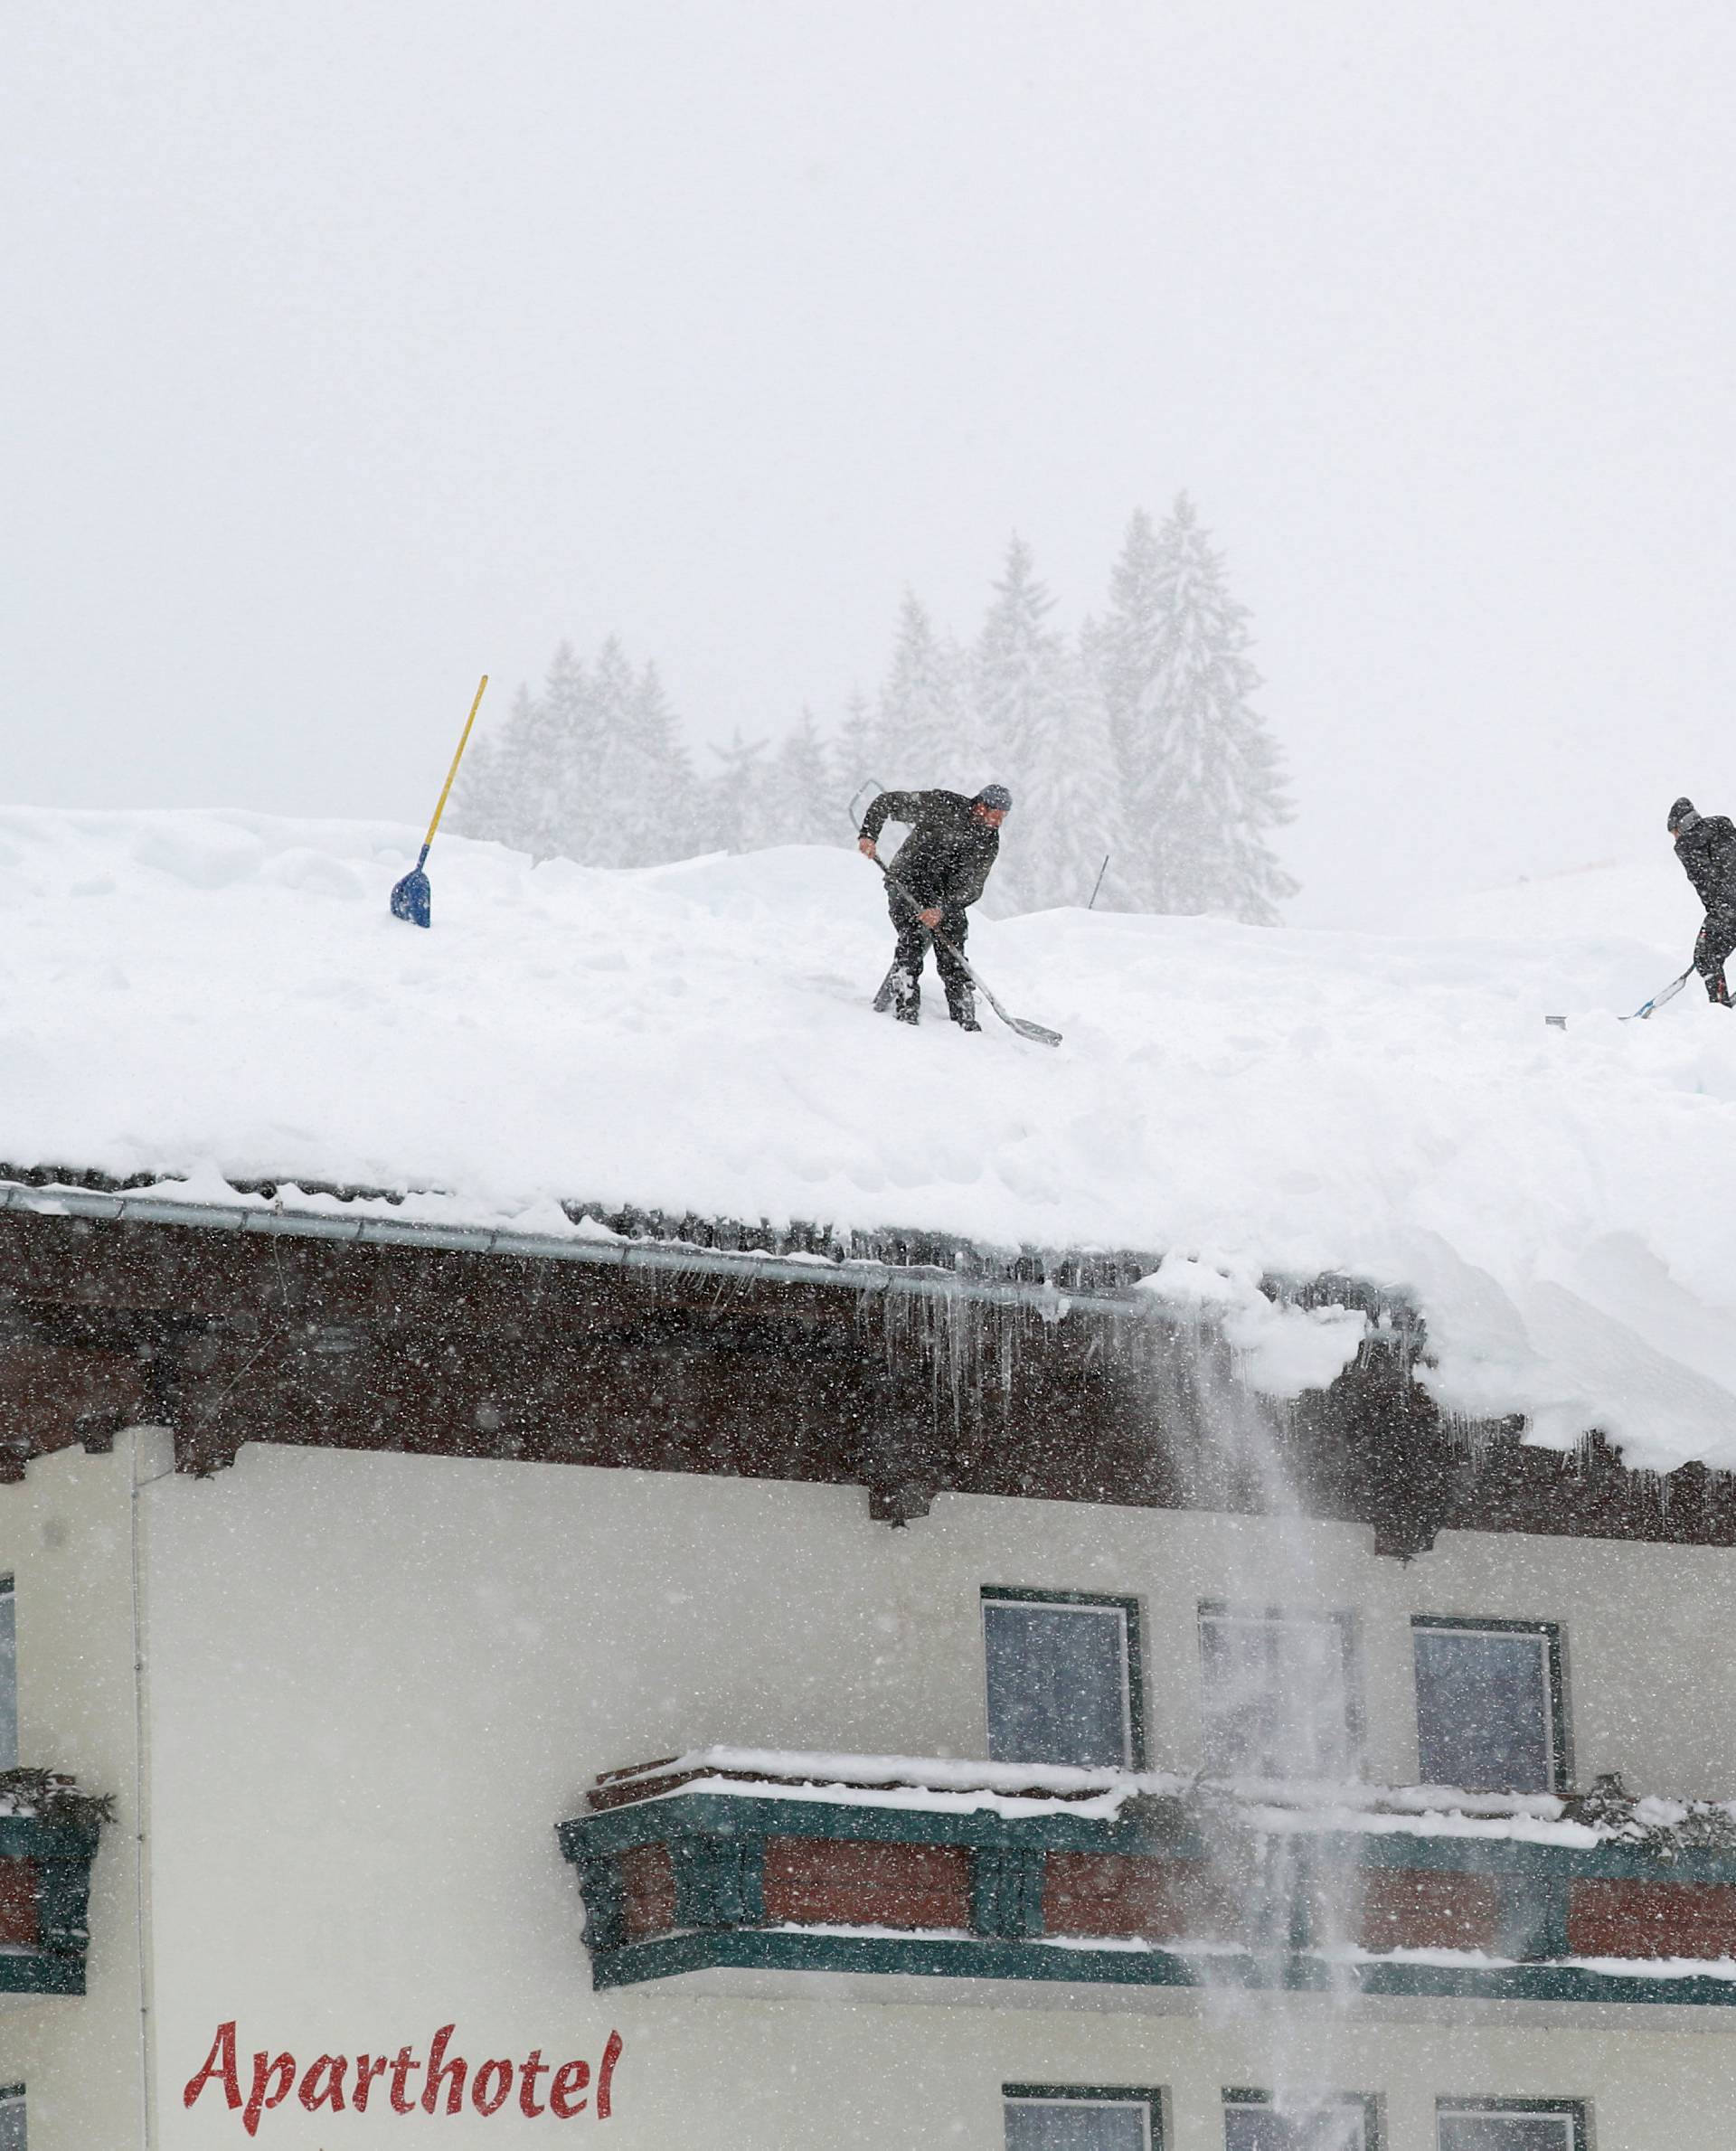 Two men shovel snow on a rooftop during heavy snowfall in Filzmoos